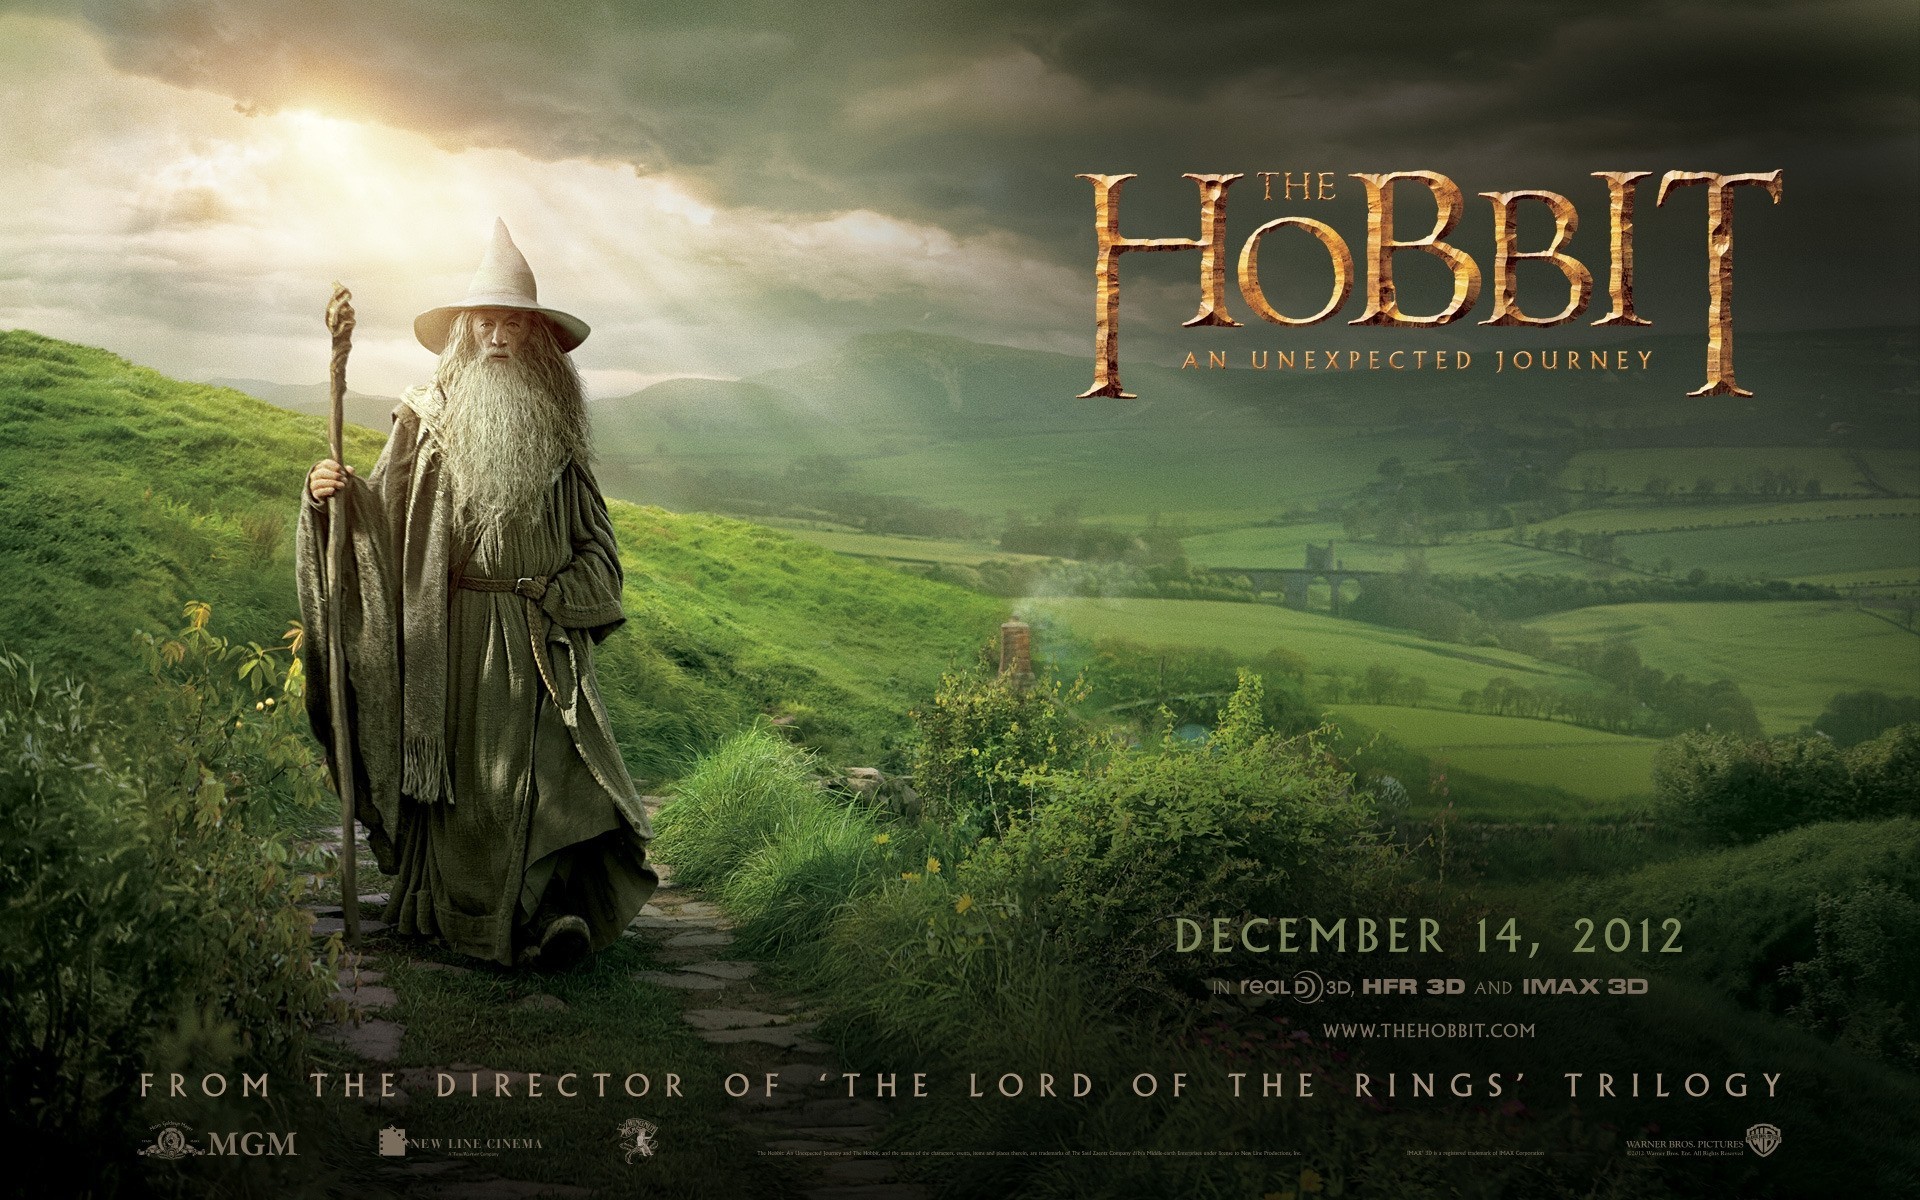 1920x1200 Movies outdoors nature sky horizontal grass gandalf hobbit HD wallpaper.  Android wallpapers for free.